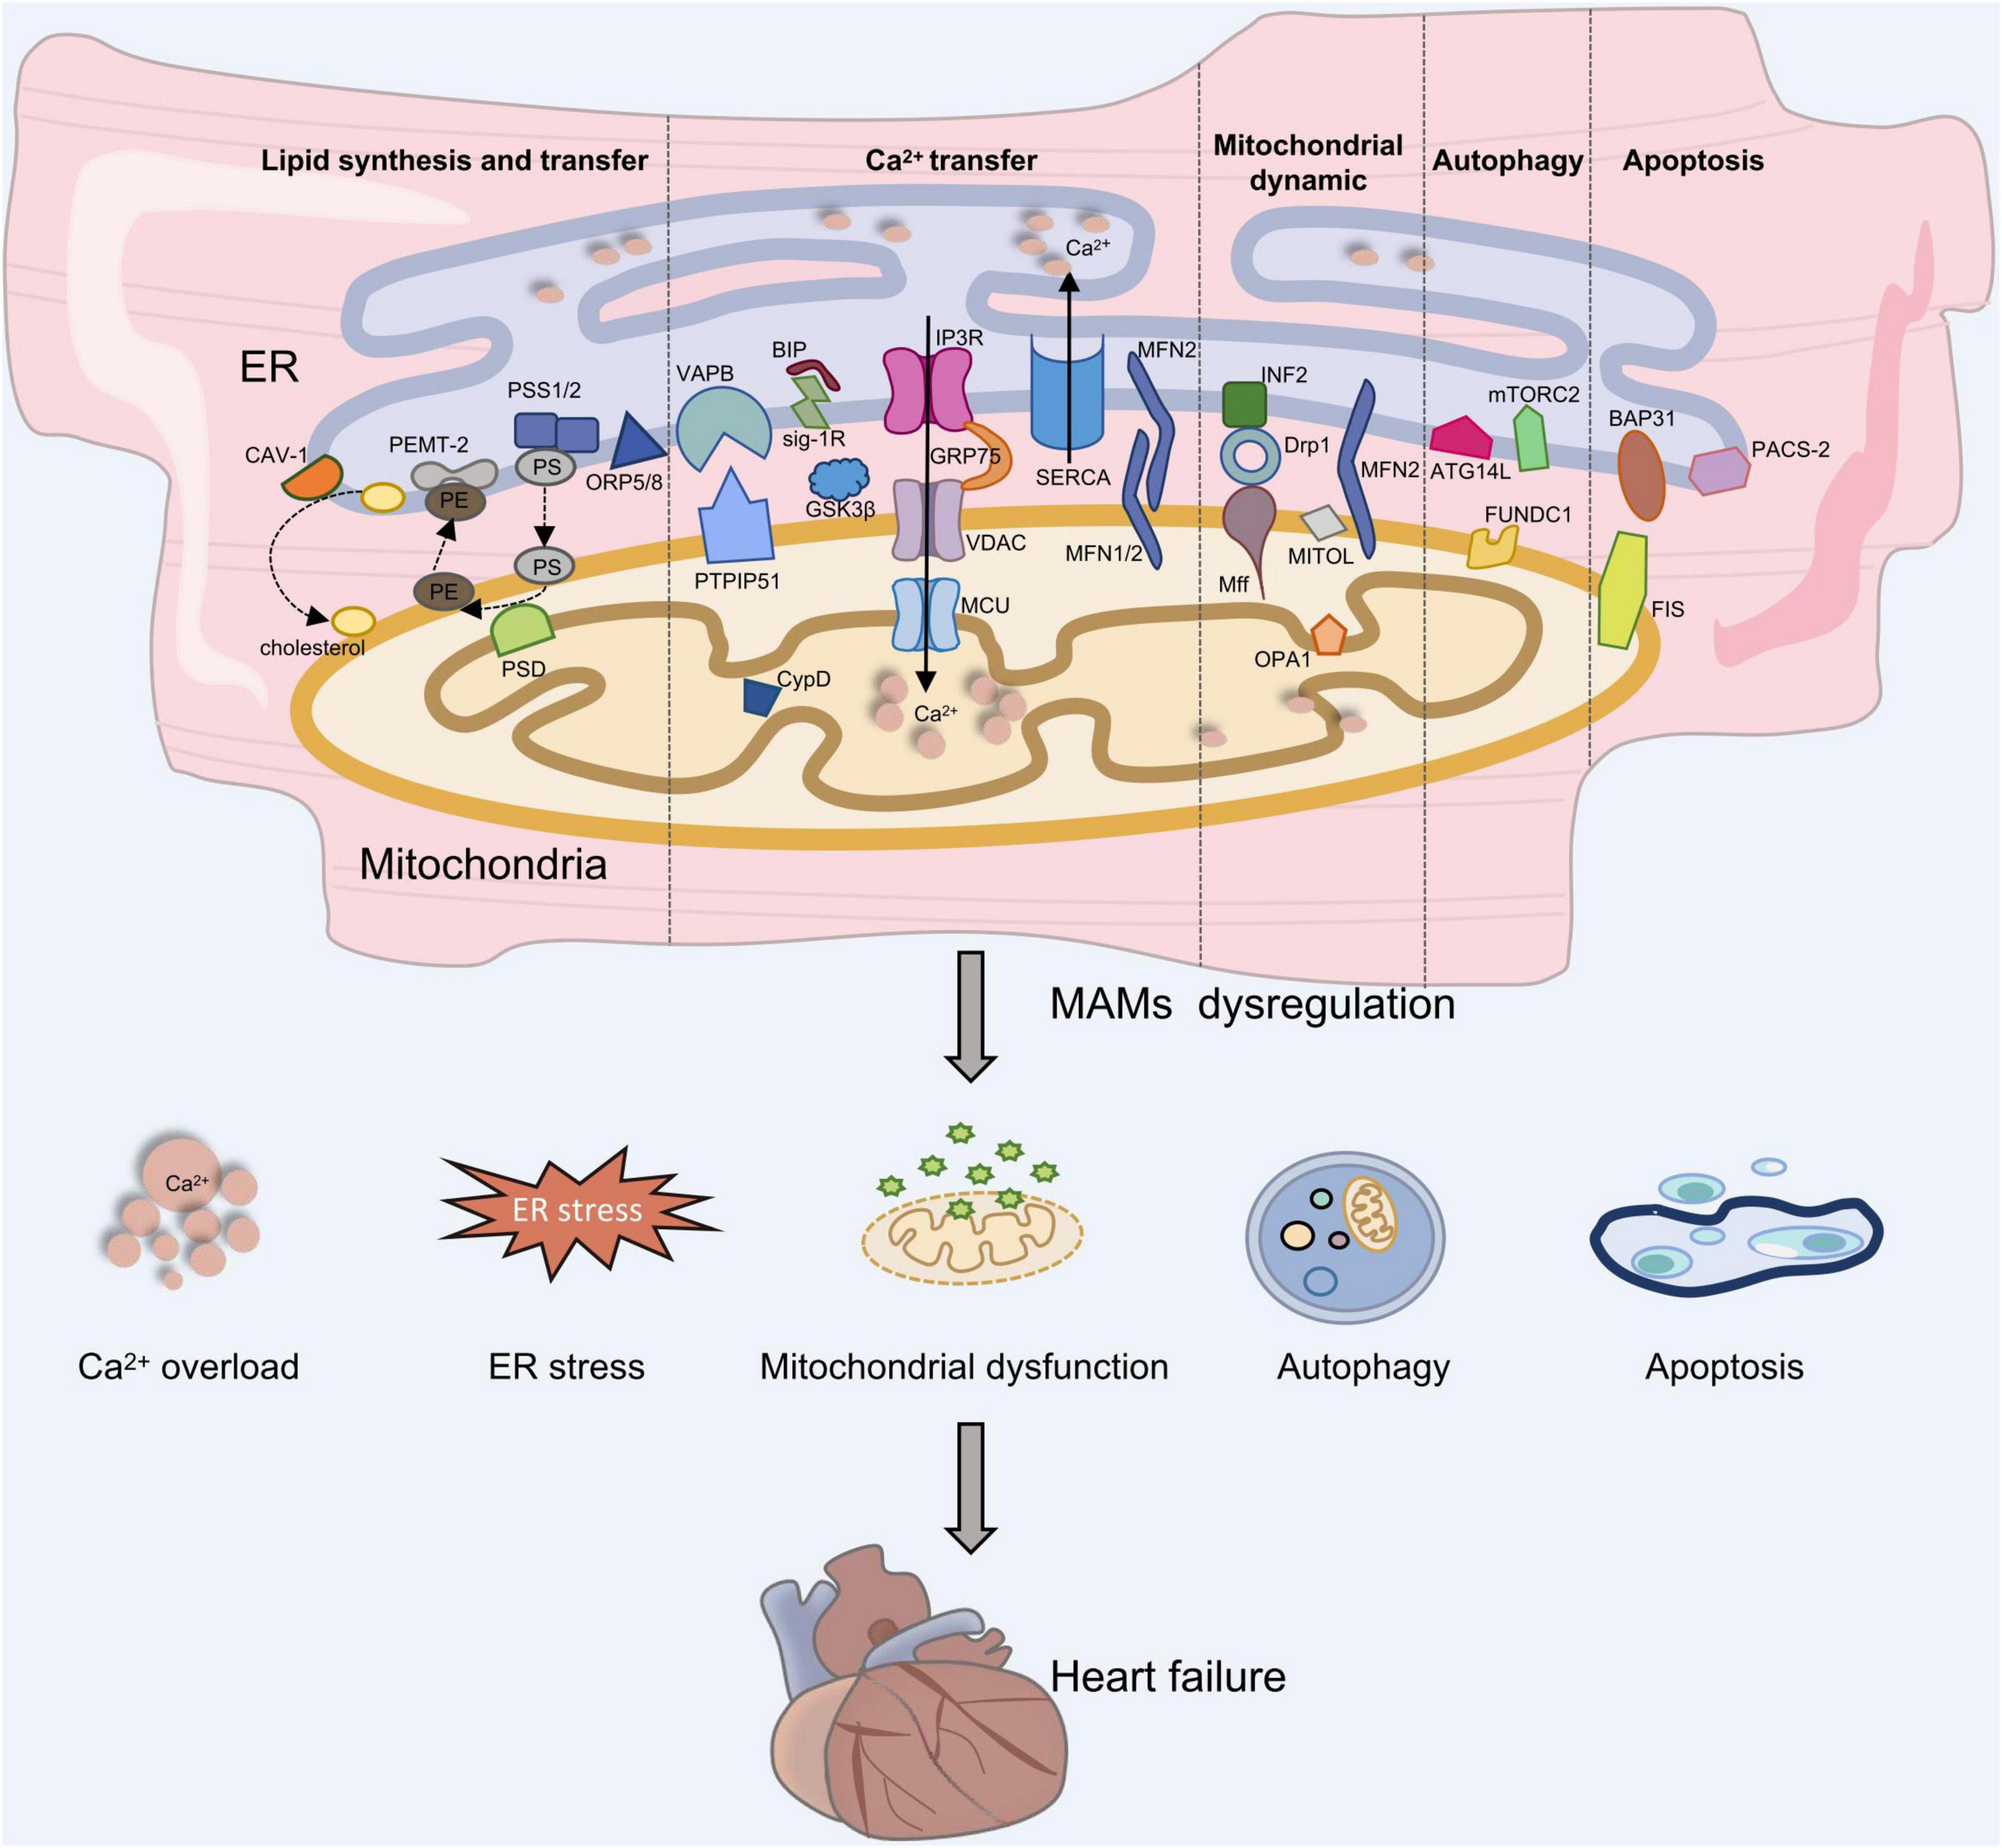 Mitochondria-associated endoplasmic reticulum membranes (MAMs): Possible therapeutic targets in heart failure